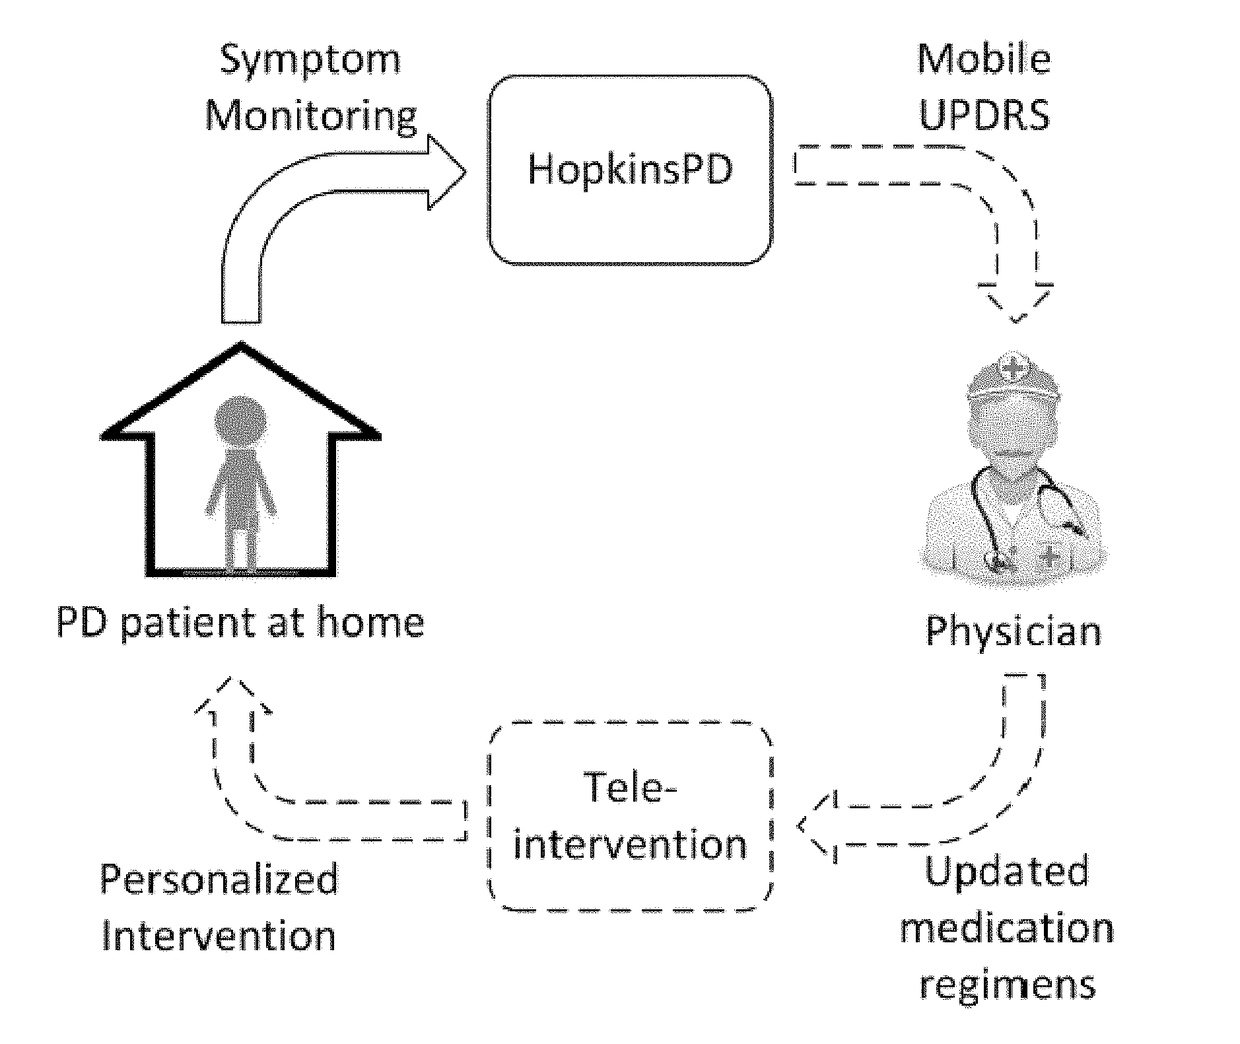 Measuring medication response using wearables for parkinson's disease